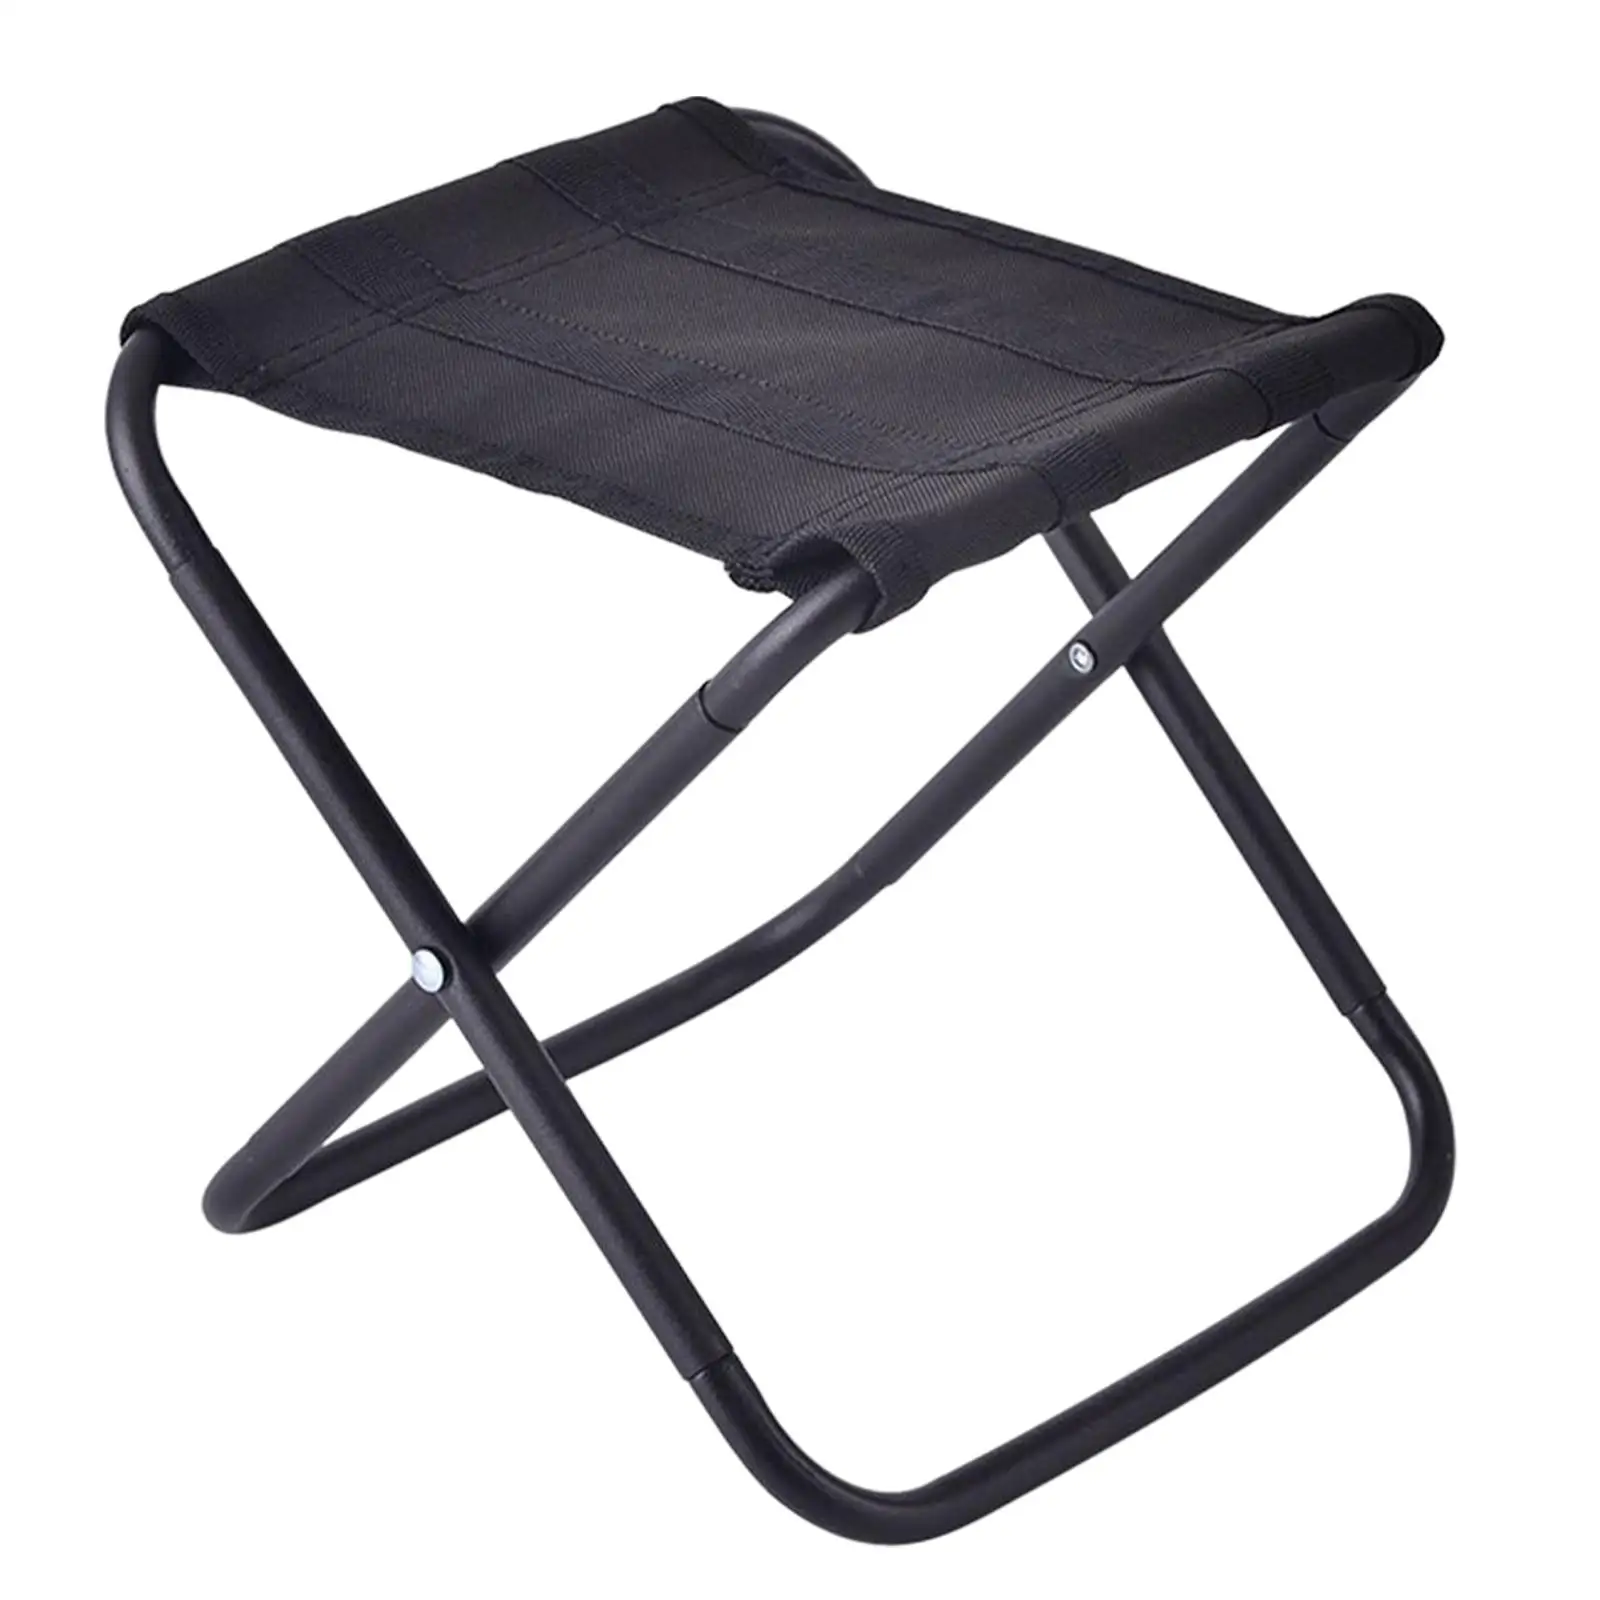 Adult Camping Stool Outdoor chair Ottoman Ultralight Foot Stool Seat for Lounge Walking Hiking Picnic Backpacking Traveling